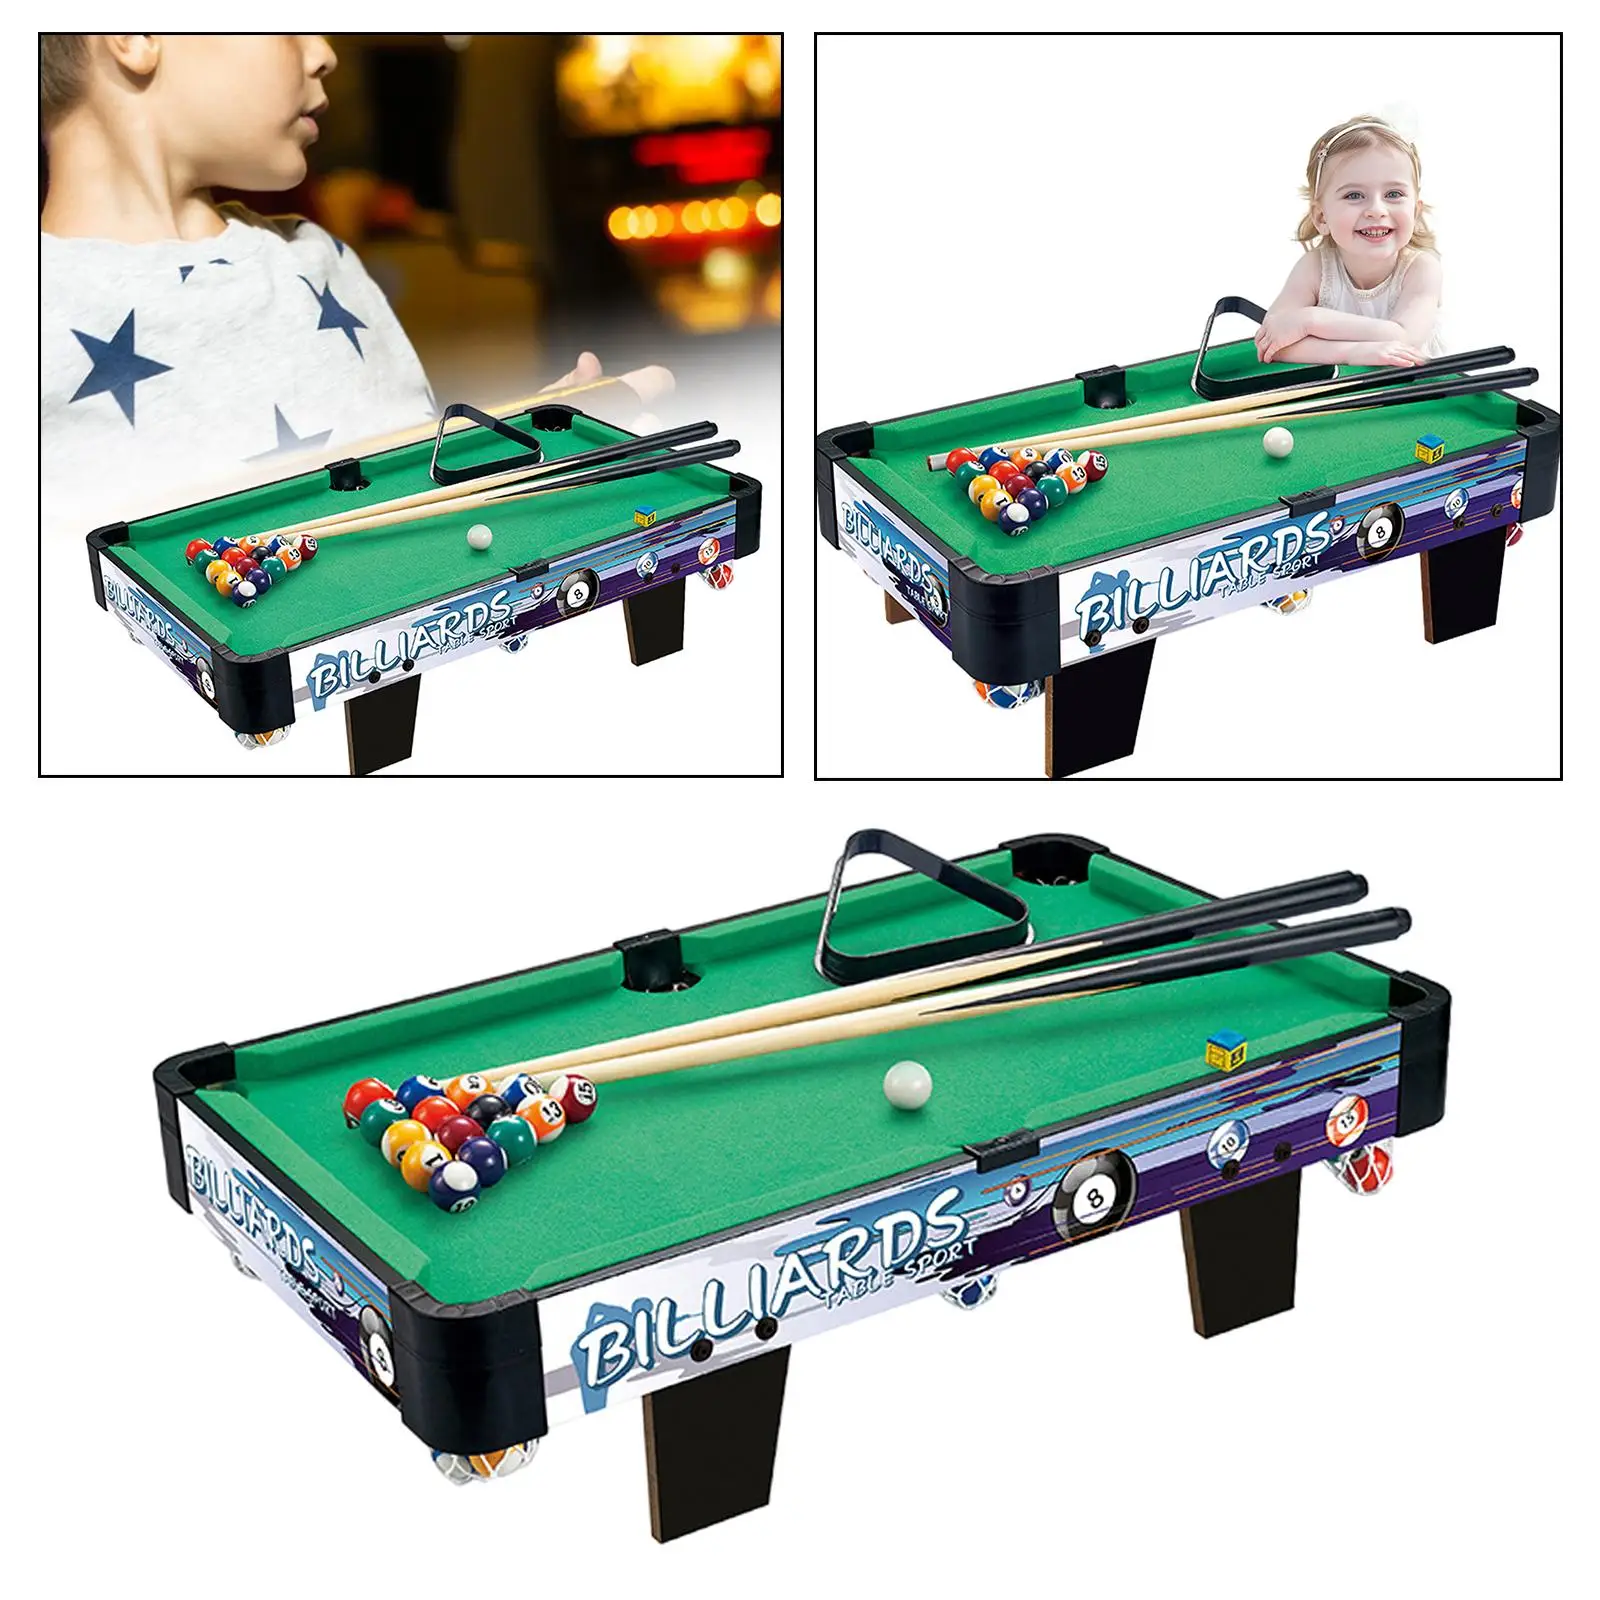 Billiard Pool Set Chalk, Triangle Rack Board Games Miniature Billiard Game for Family Home Office Use Adults Parties Children